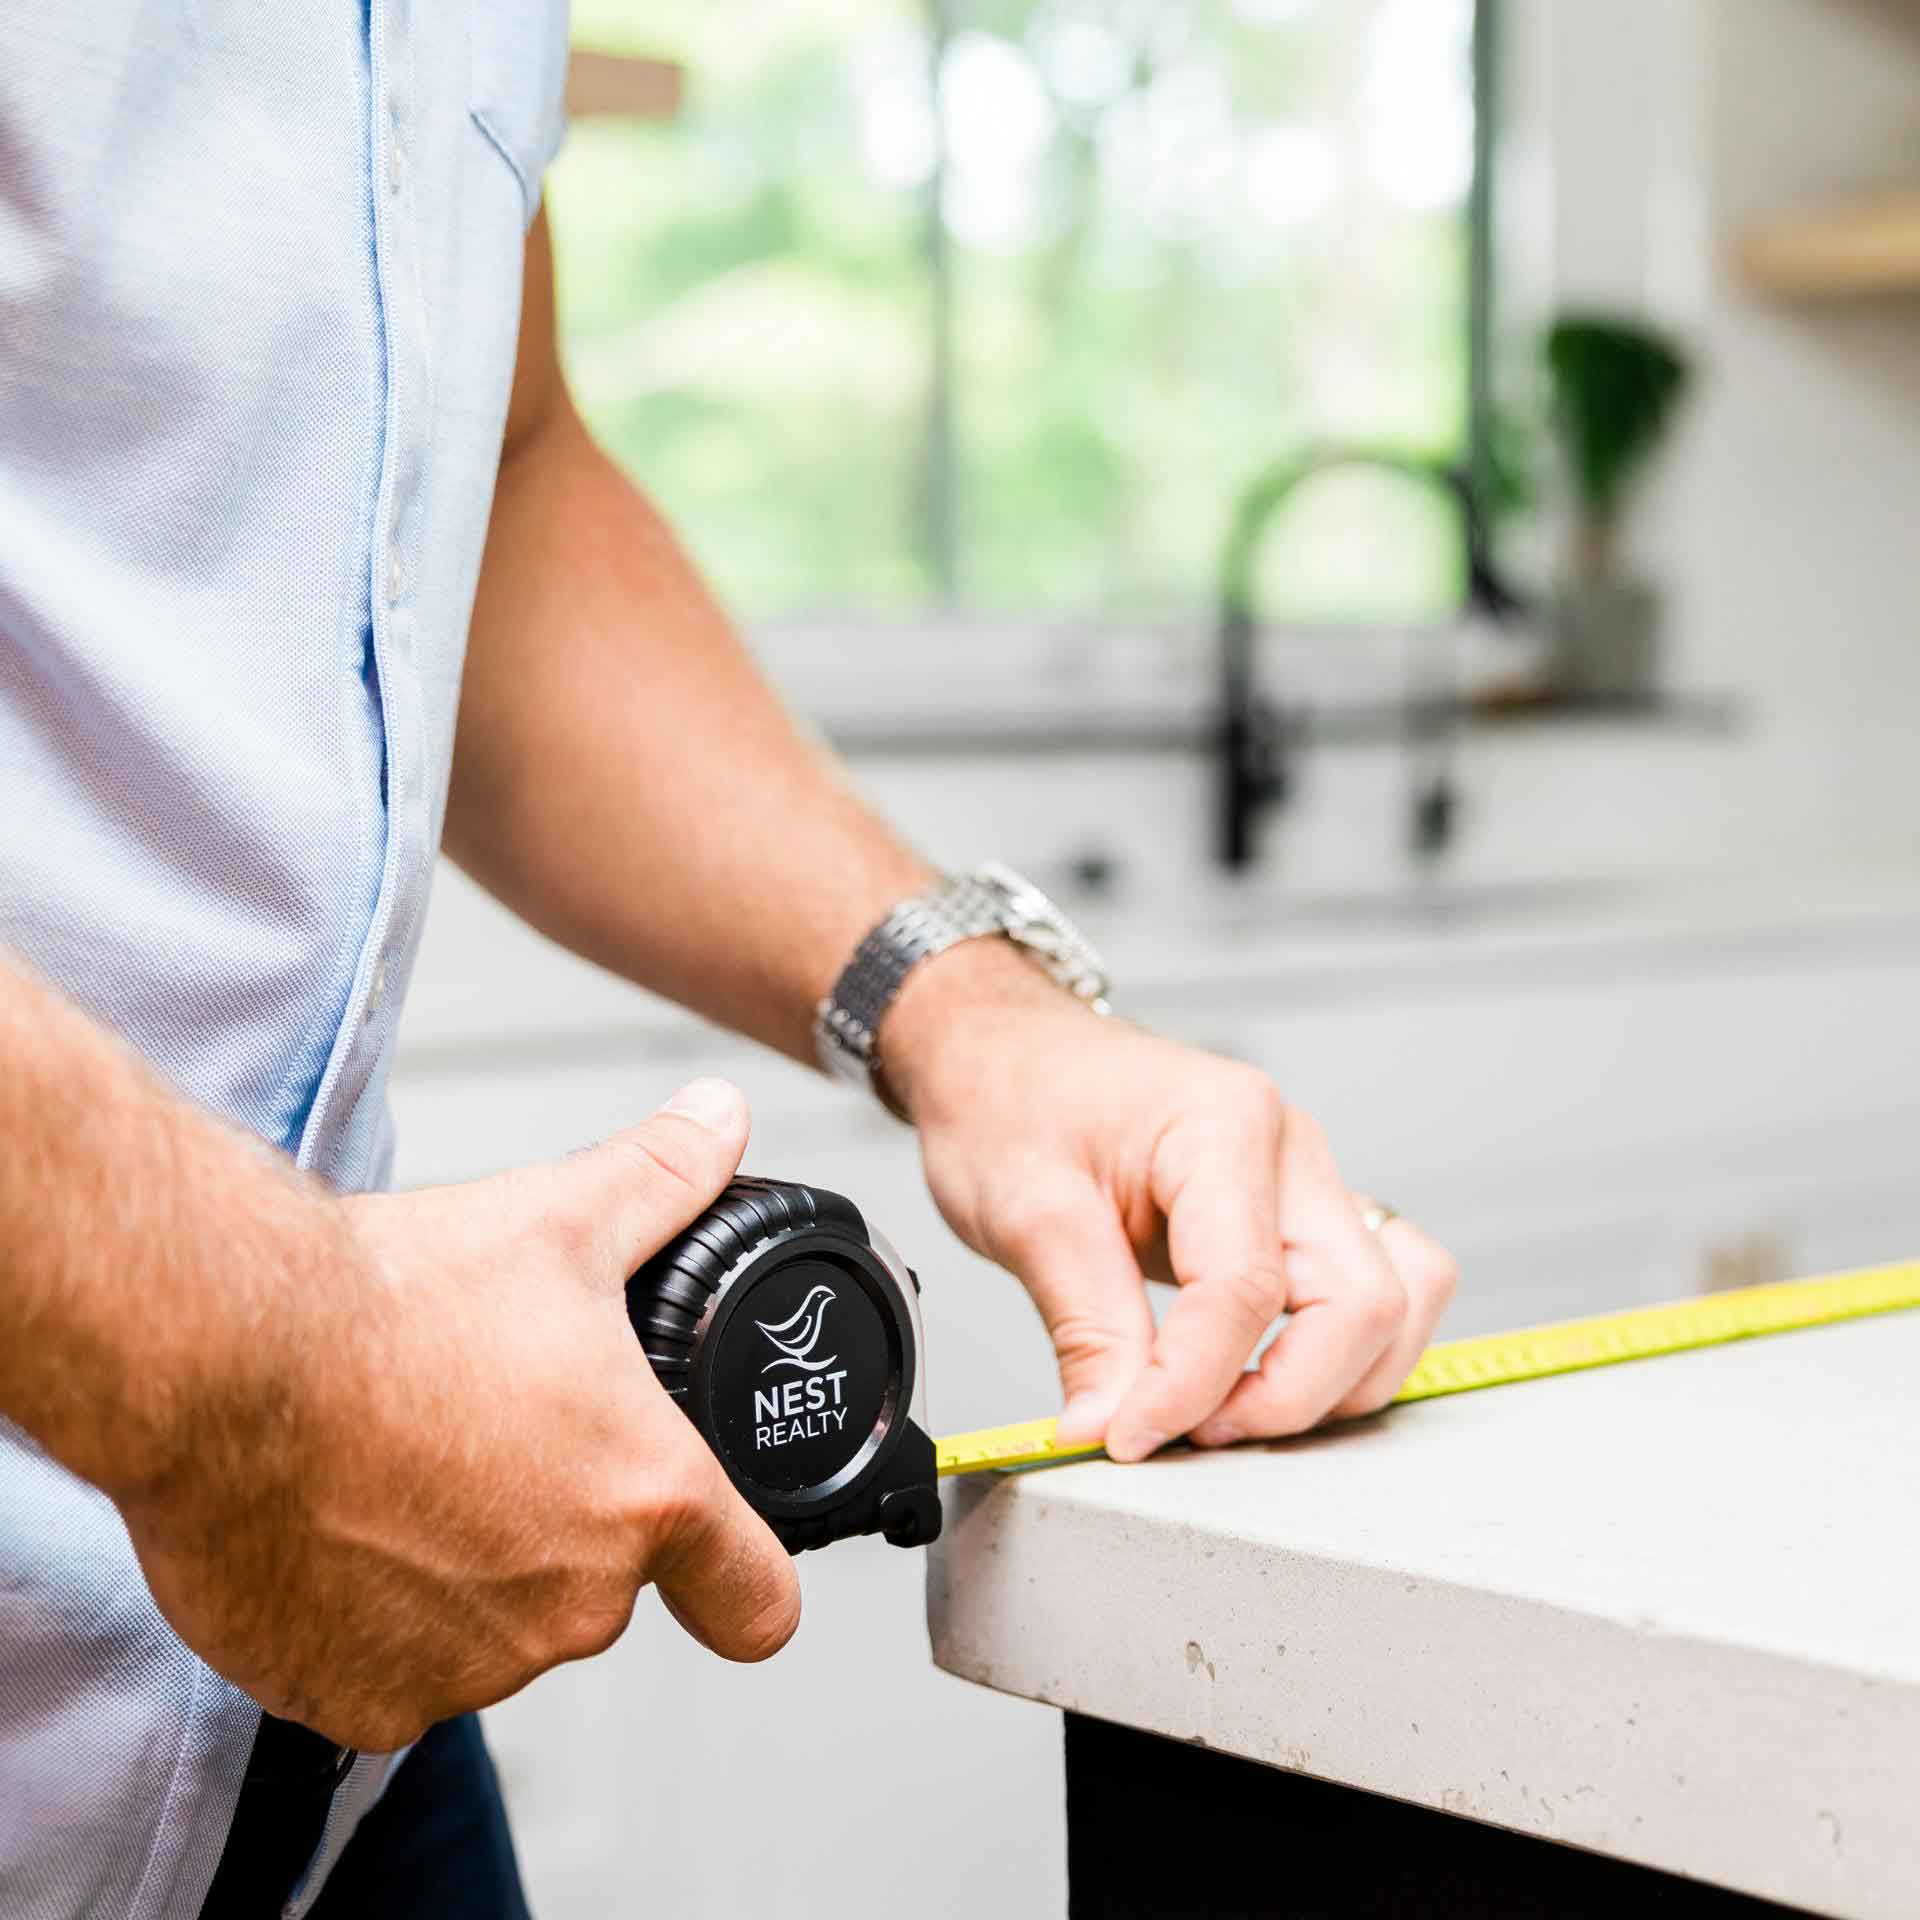 Nest tape measure being used to measure a countertop